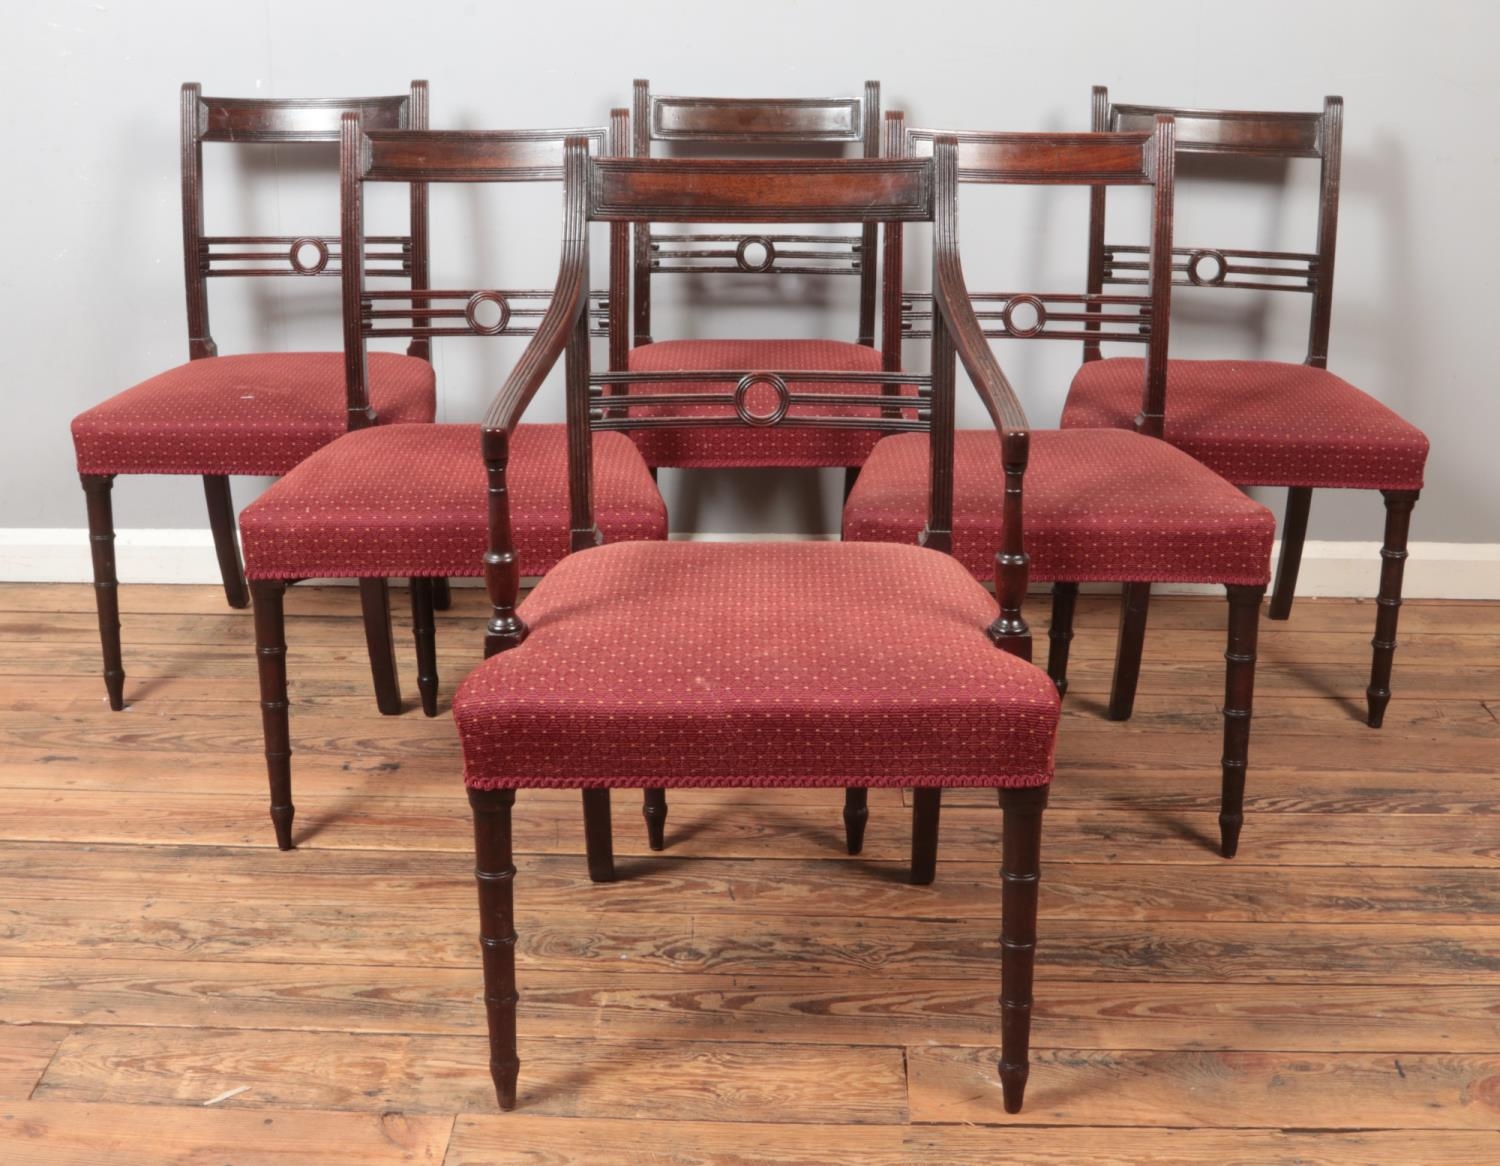 A set of six dark oak dining chairs, with unusual stranded splat and central hole, turned front legs